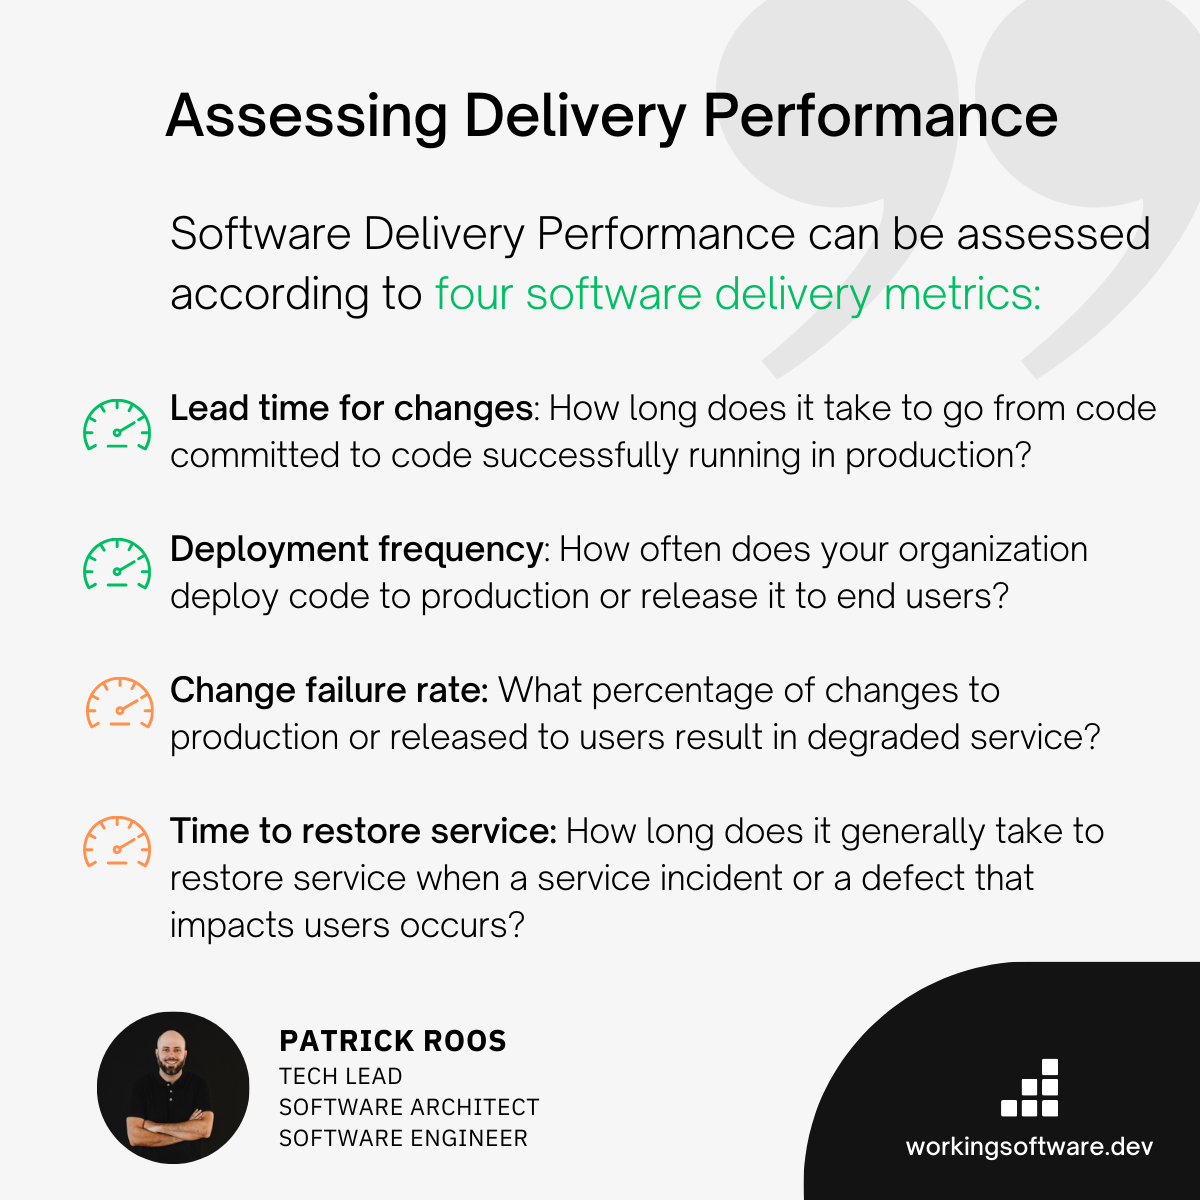 6 Proven Architecture Tactics to Boost Software Delivery Performance